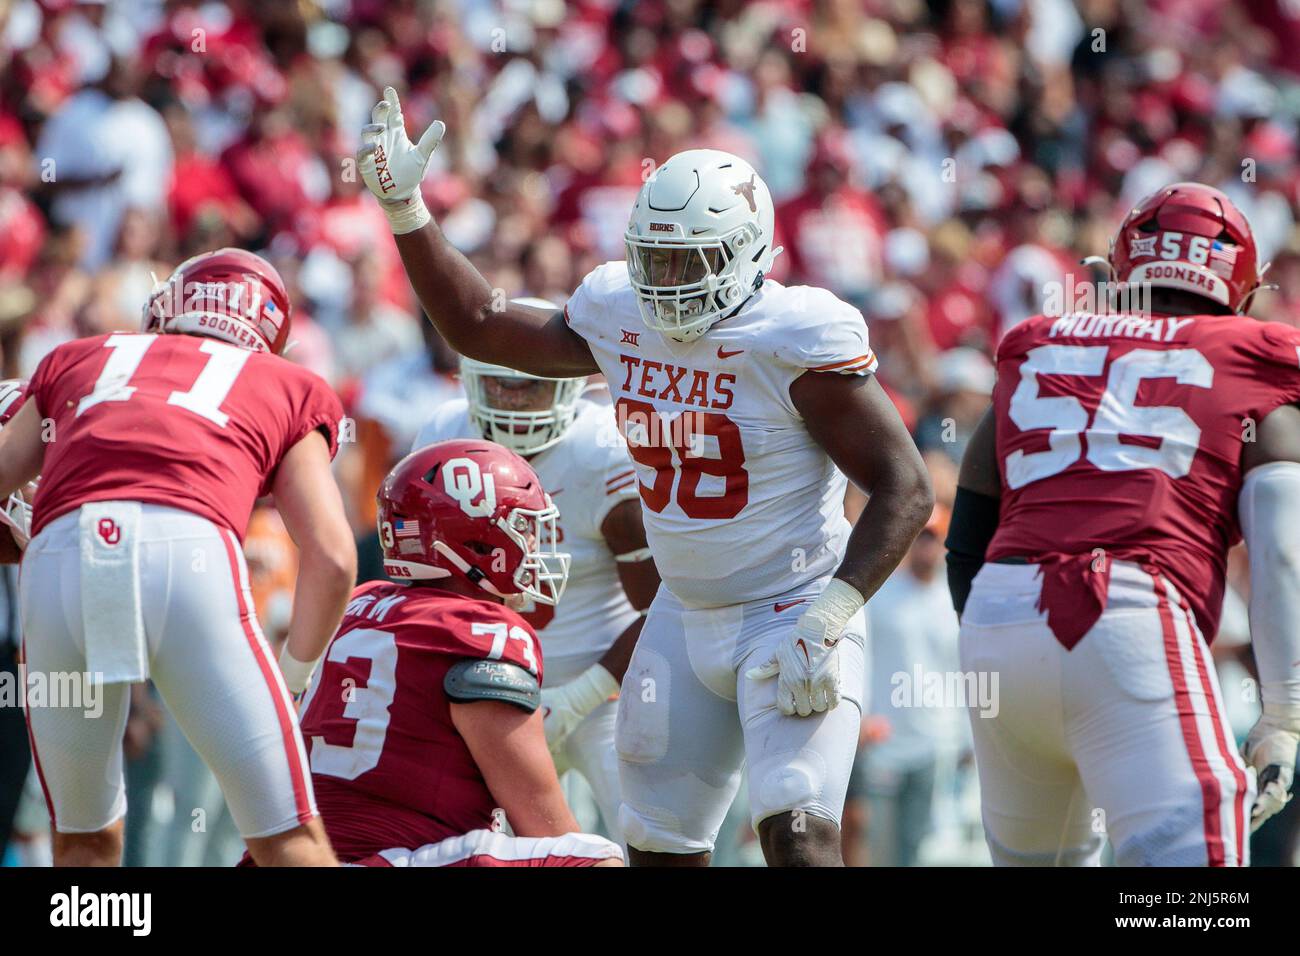 DALLAS, TX - OCTOBER 08: Texas Longhorns defensive end Barryn Sorrell (88)  pumps up the crowd prior to a play during the second half against the  Oklahoma Sooners on October 8th 2022